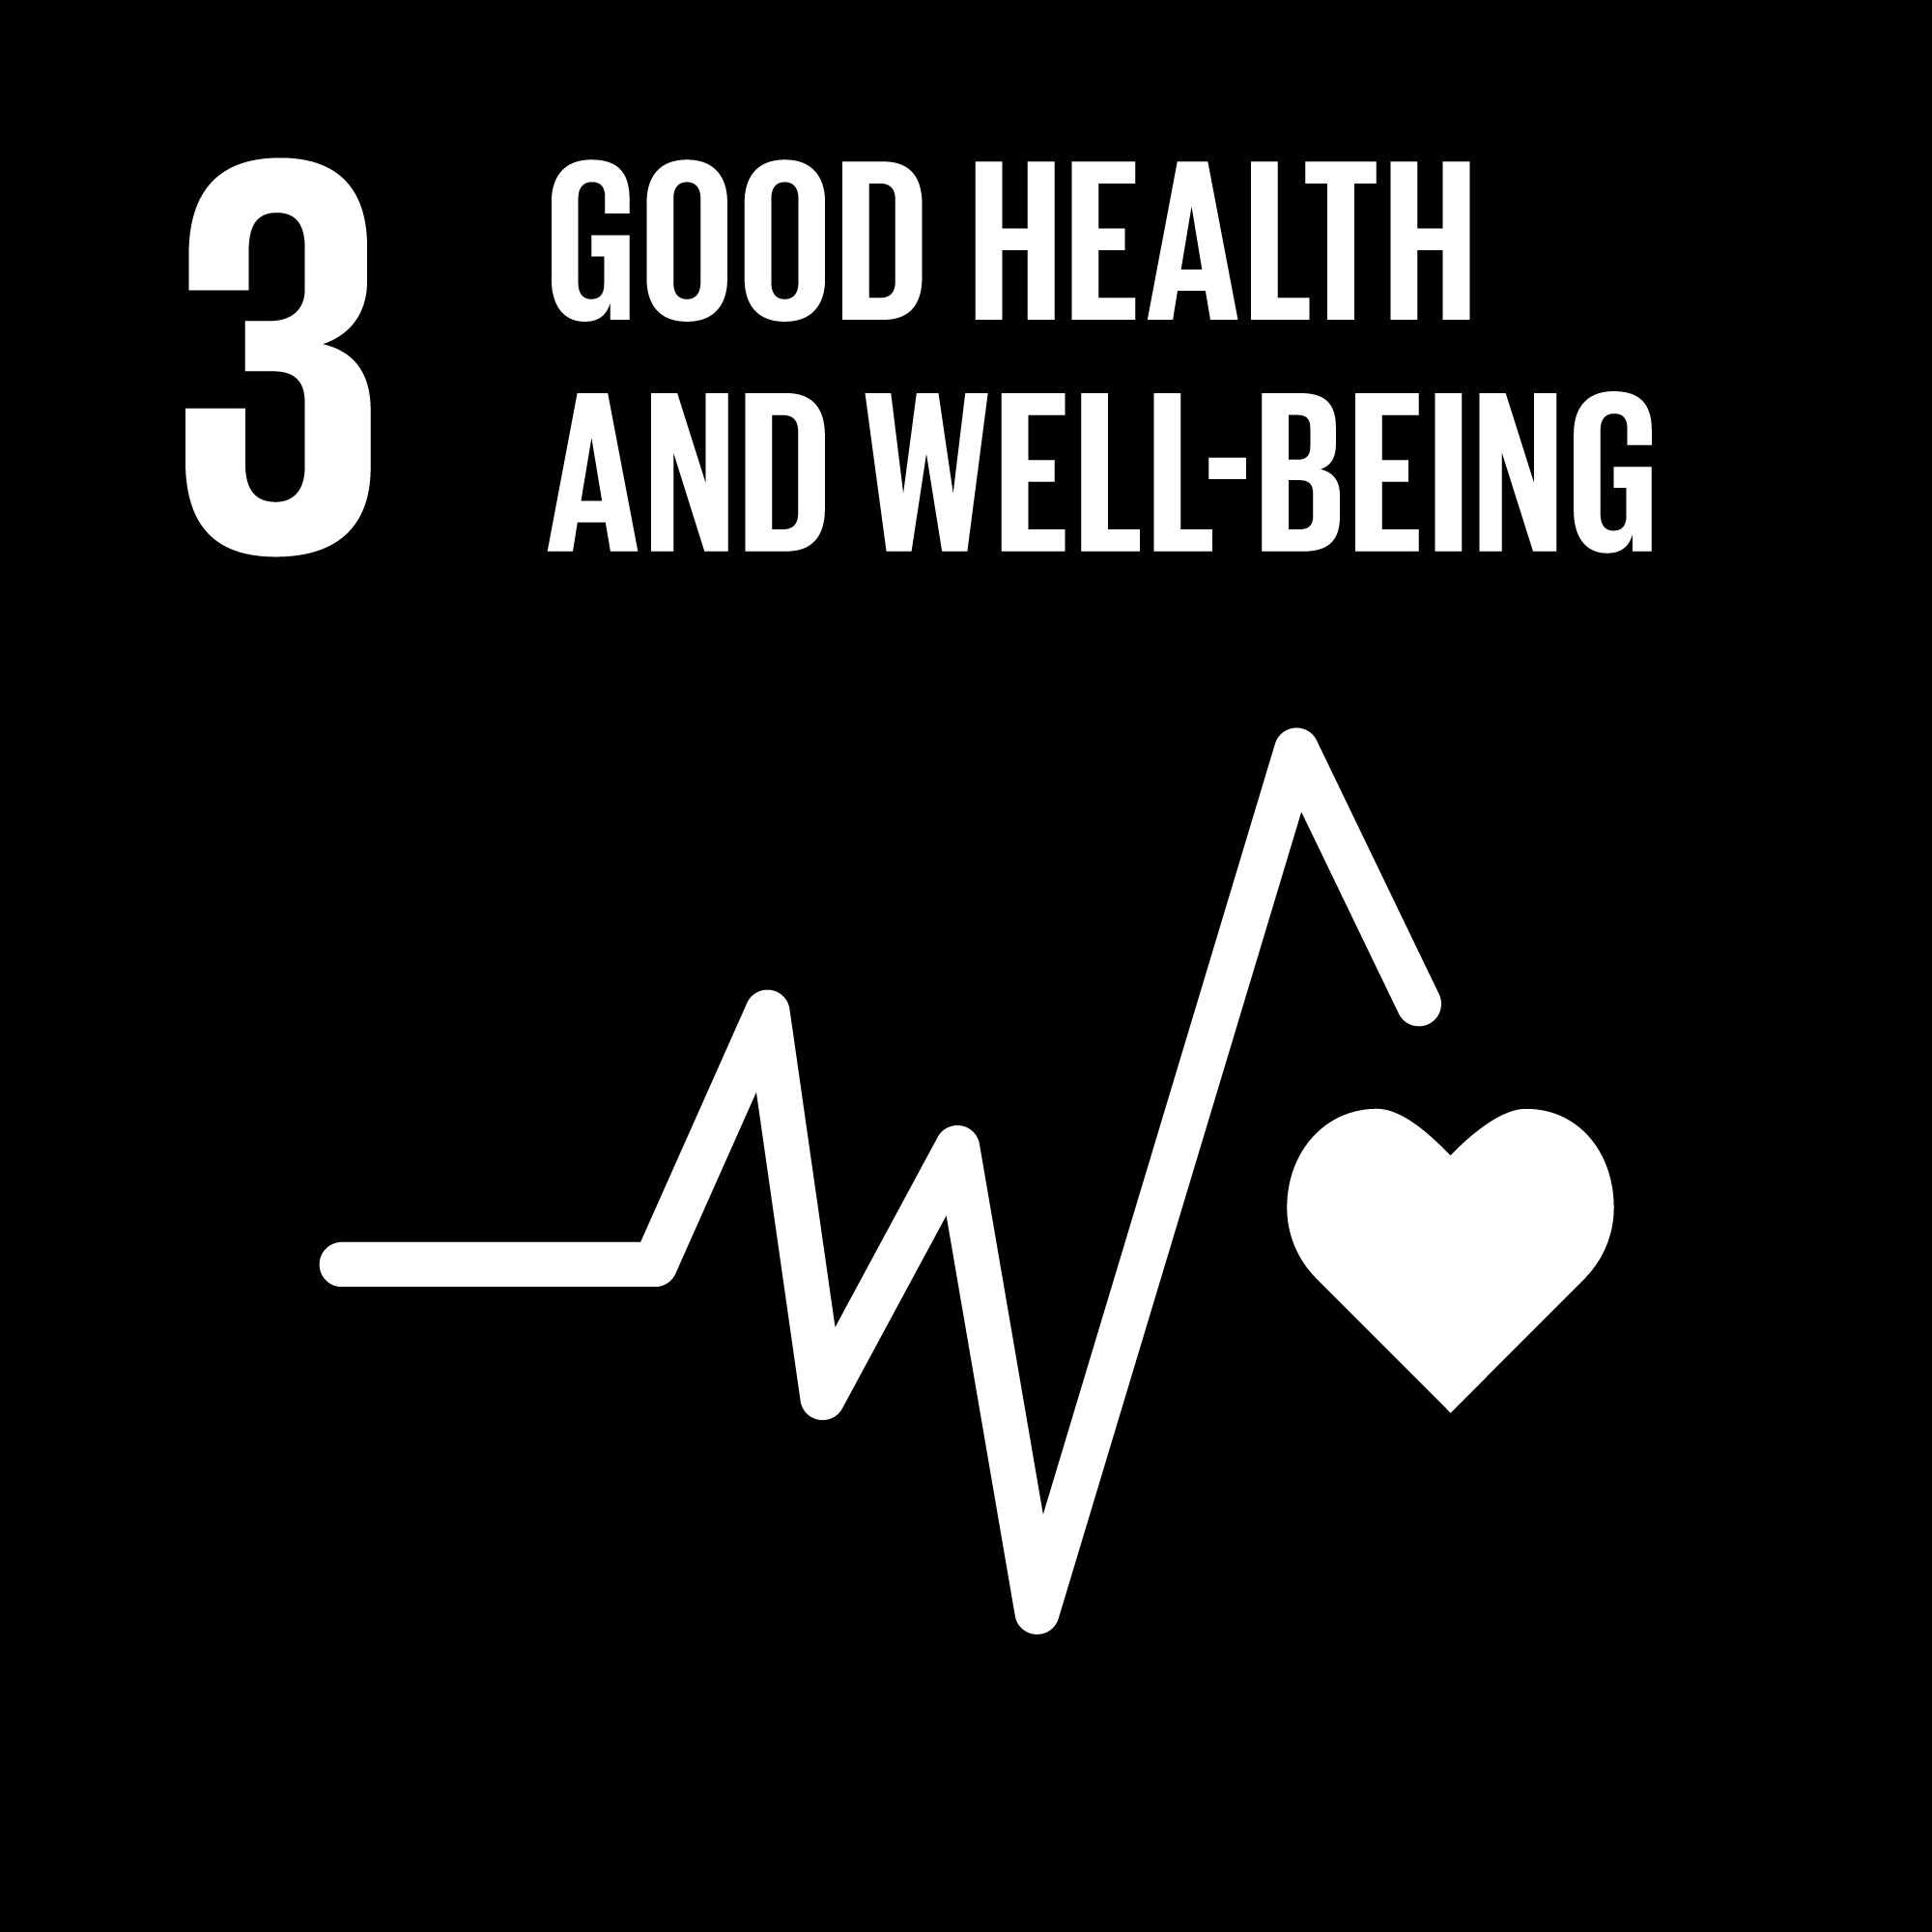 Sustainable Development Goals - 3 - Good Health and Well-Being